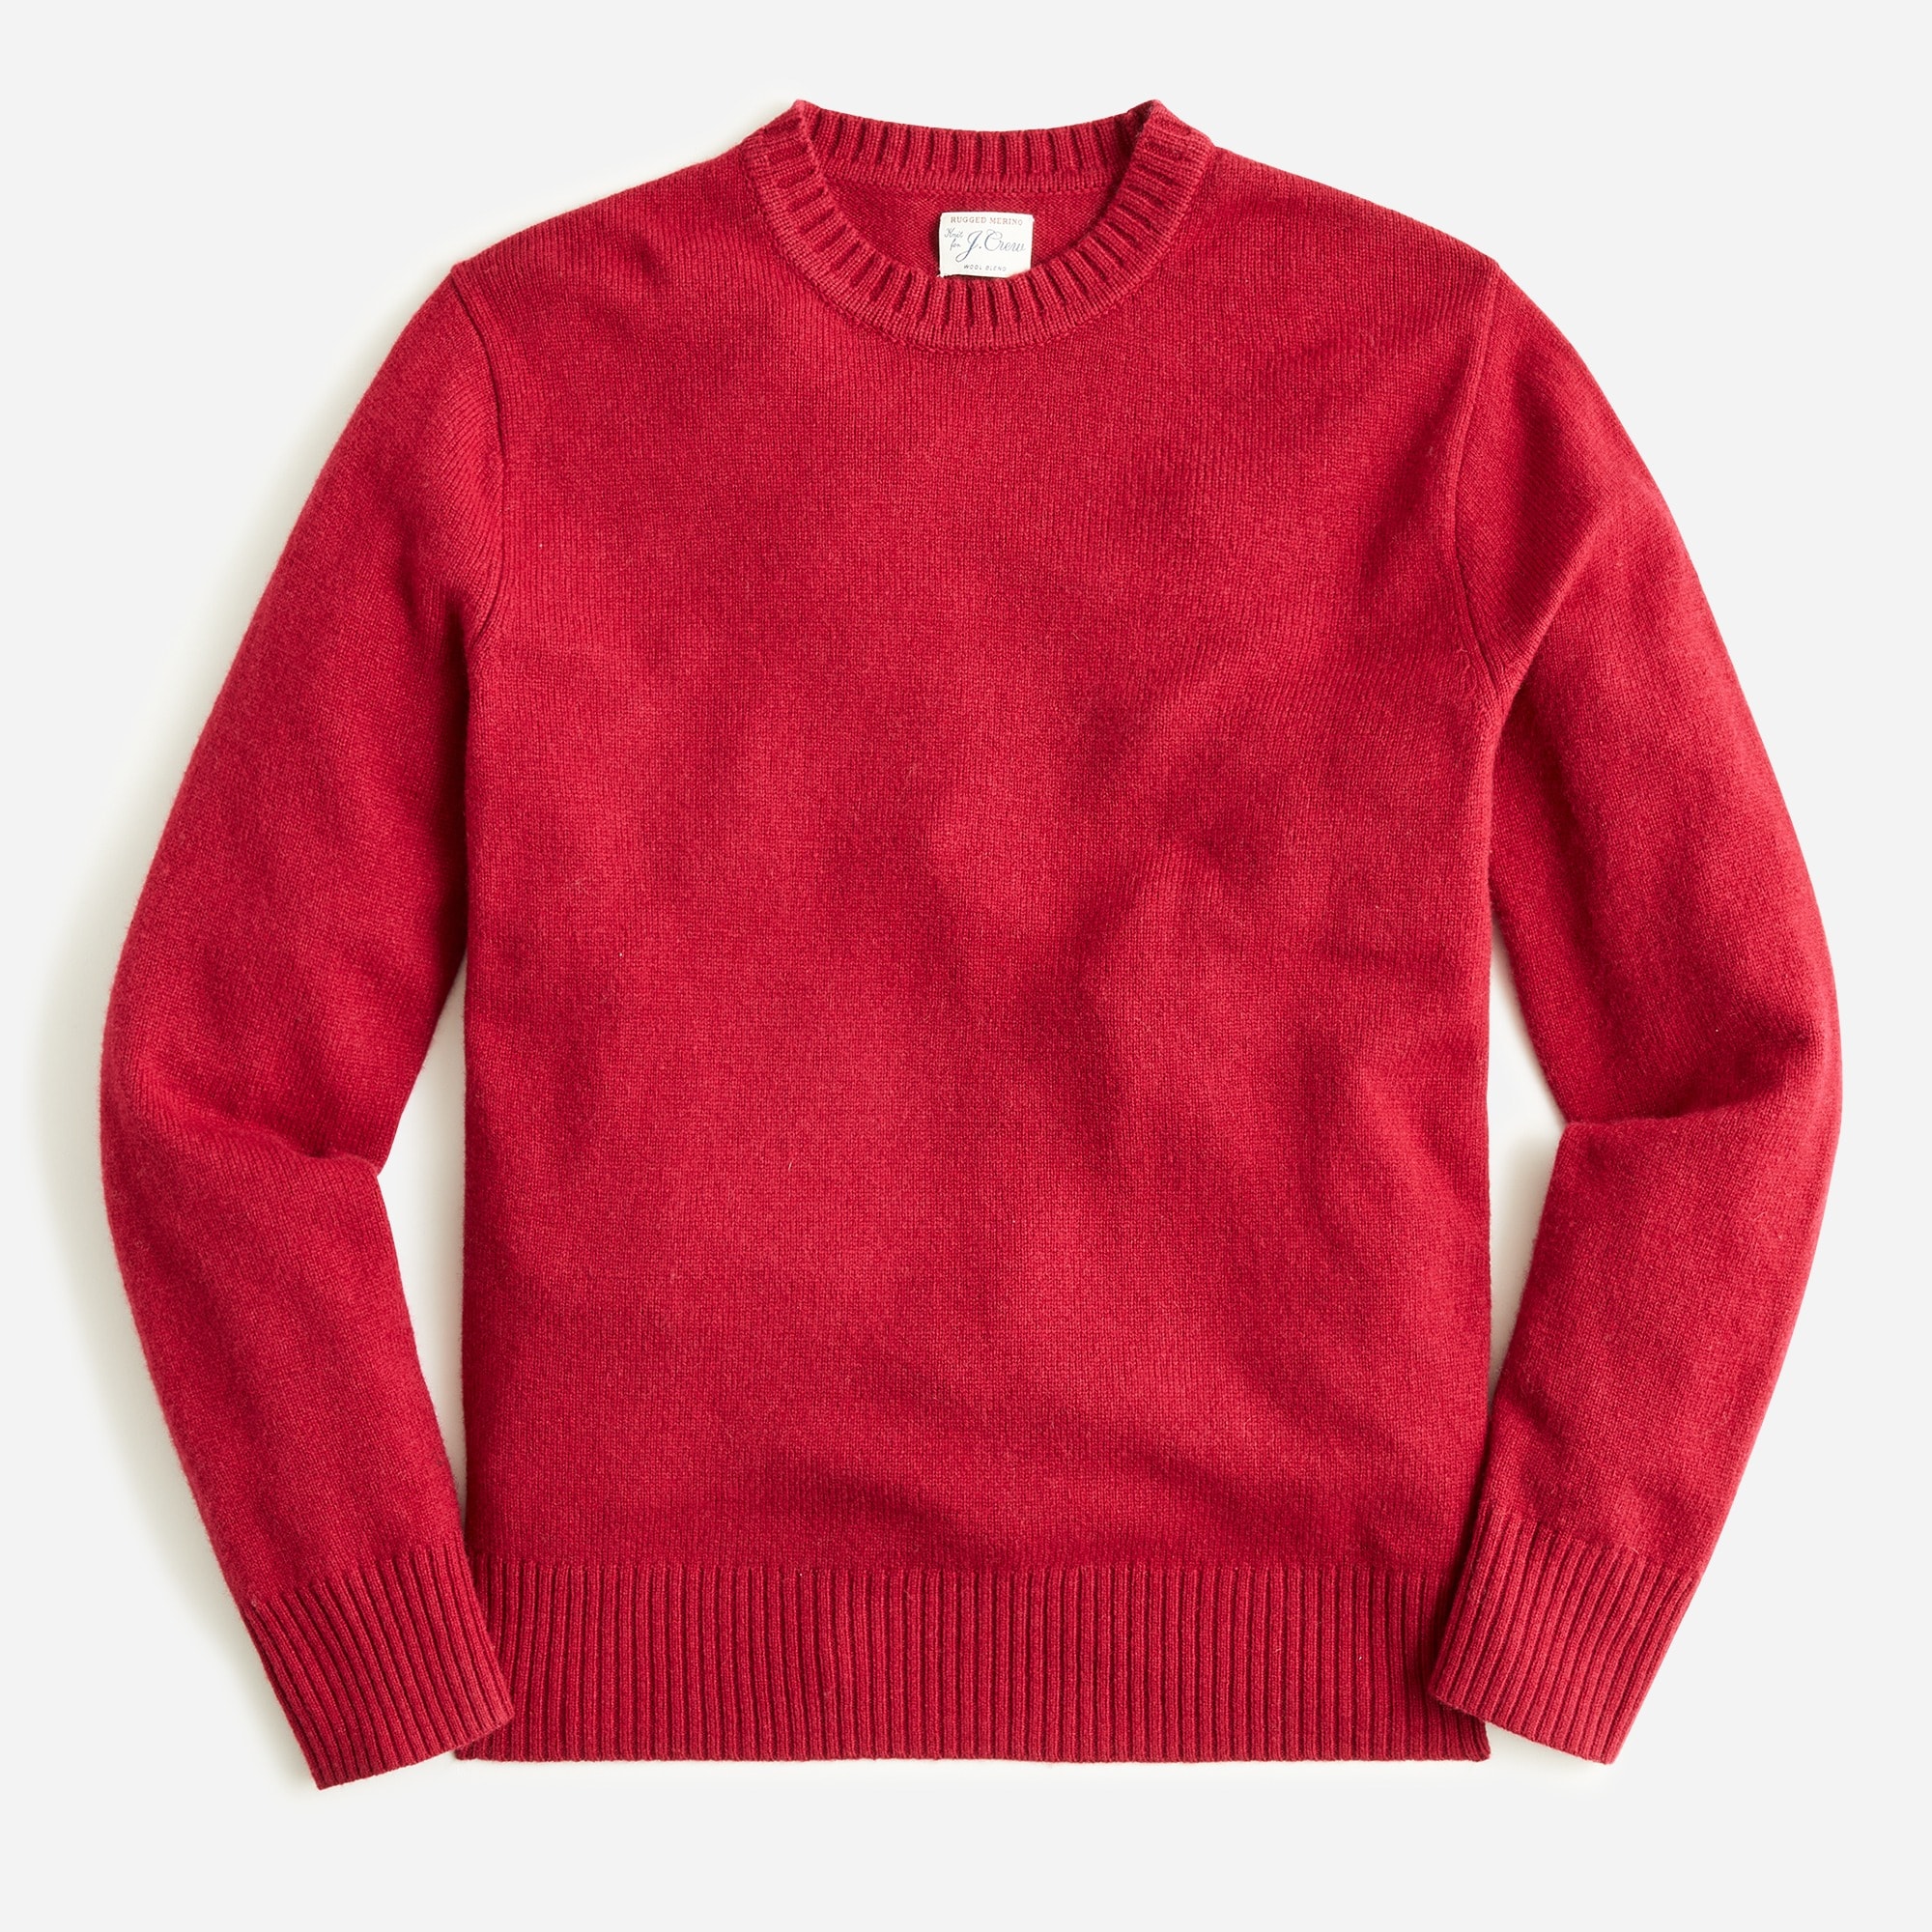 New J.Crew Rugged merino wool cable-knit sweater in donegal BA309 XL ...